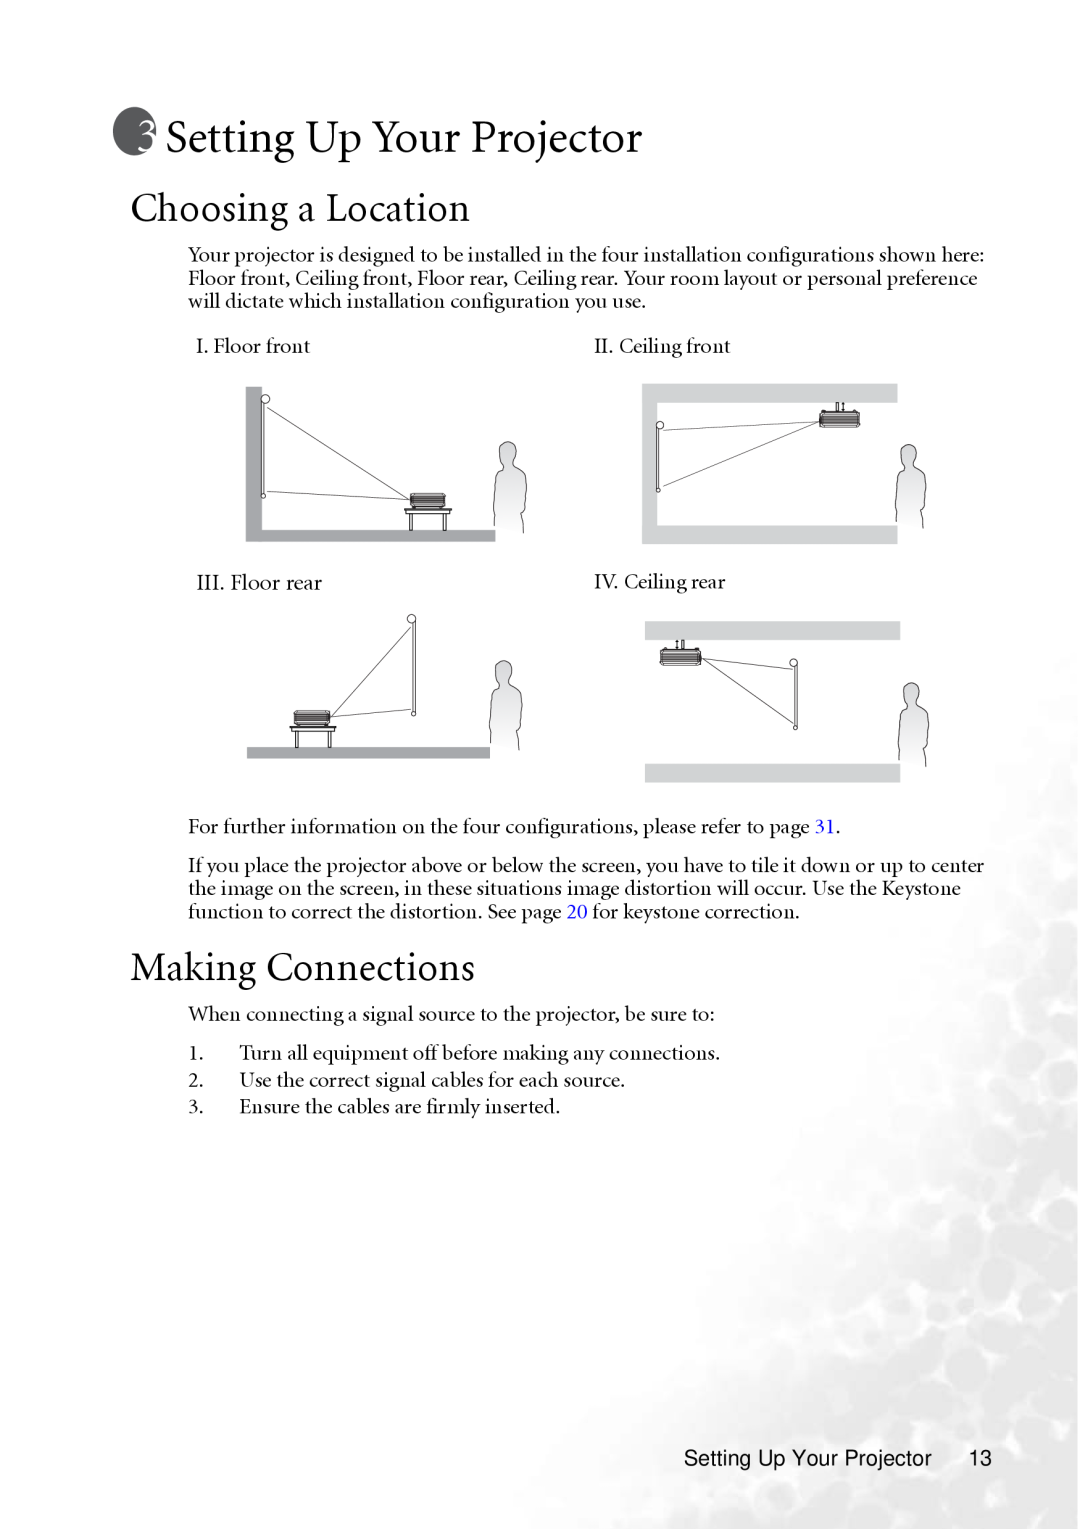 BenQ PB8250, PB8240 user manual Setting Up Your Projector, Choosing a Location, Making Connections 